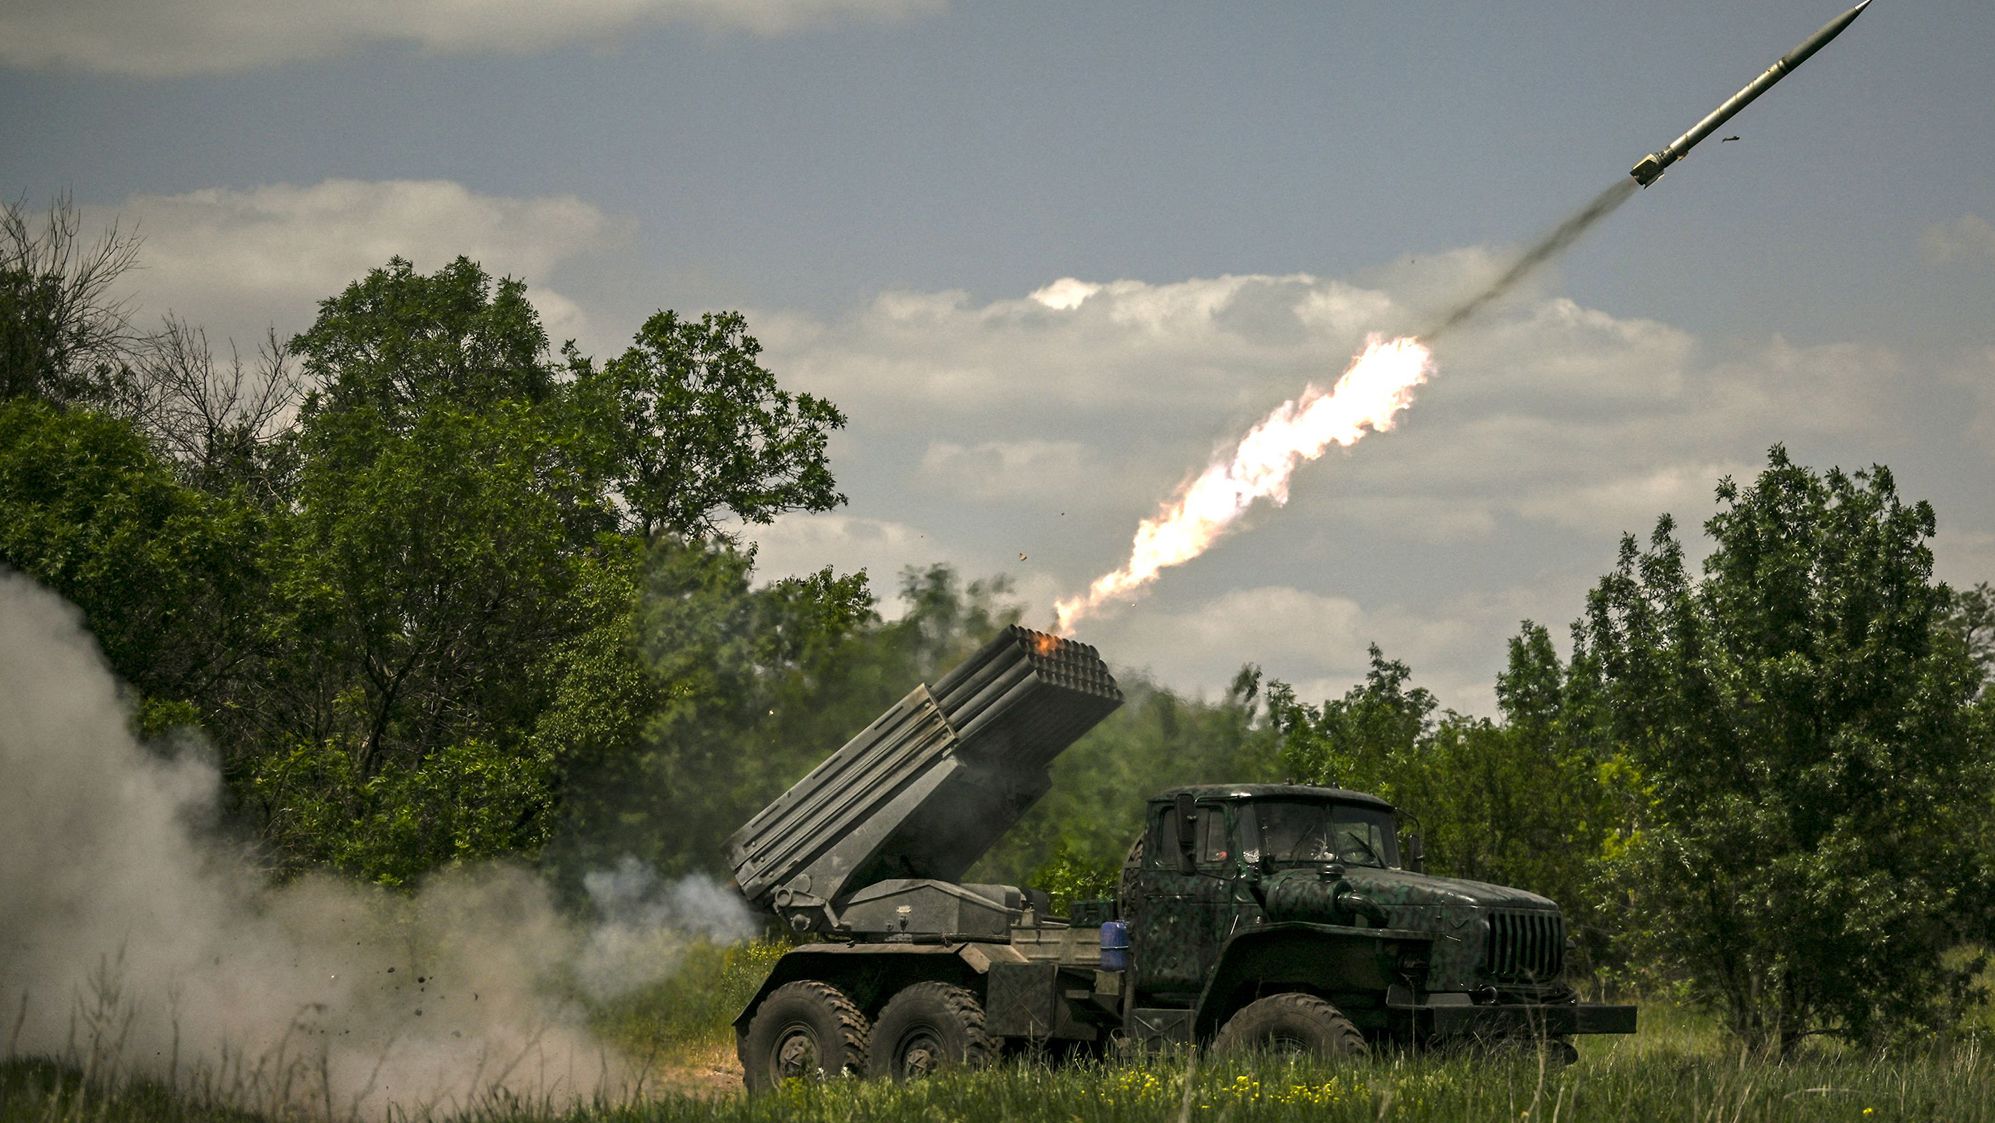 Ukrainian troops fire surface-to-surface rockets from <a href="https://edition.cnn.com/2022/05/26/politics/us-long-range-rockets-ukraine-mlrs/index.html" target="_blank">MLRS</a> towards Russian positions at the front line in the eastern Ukrainian region of Donbas on June 7.